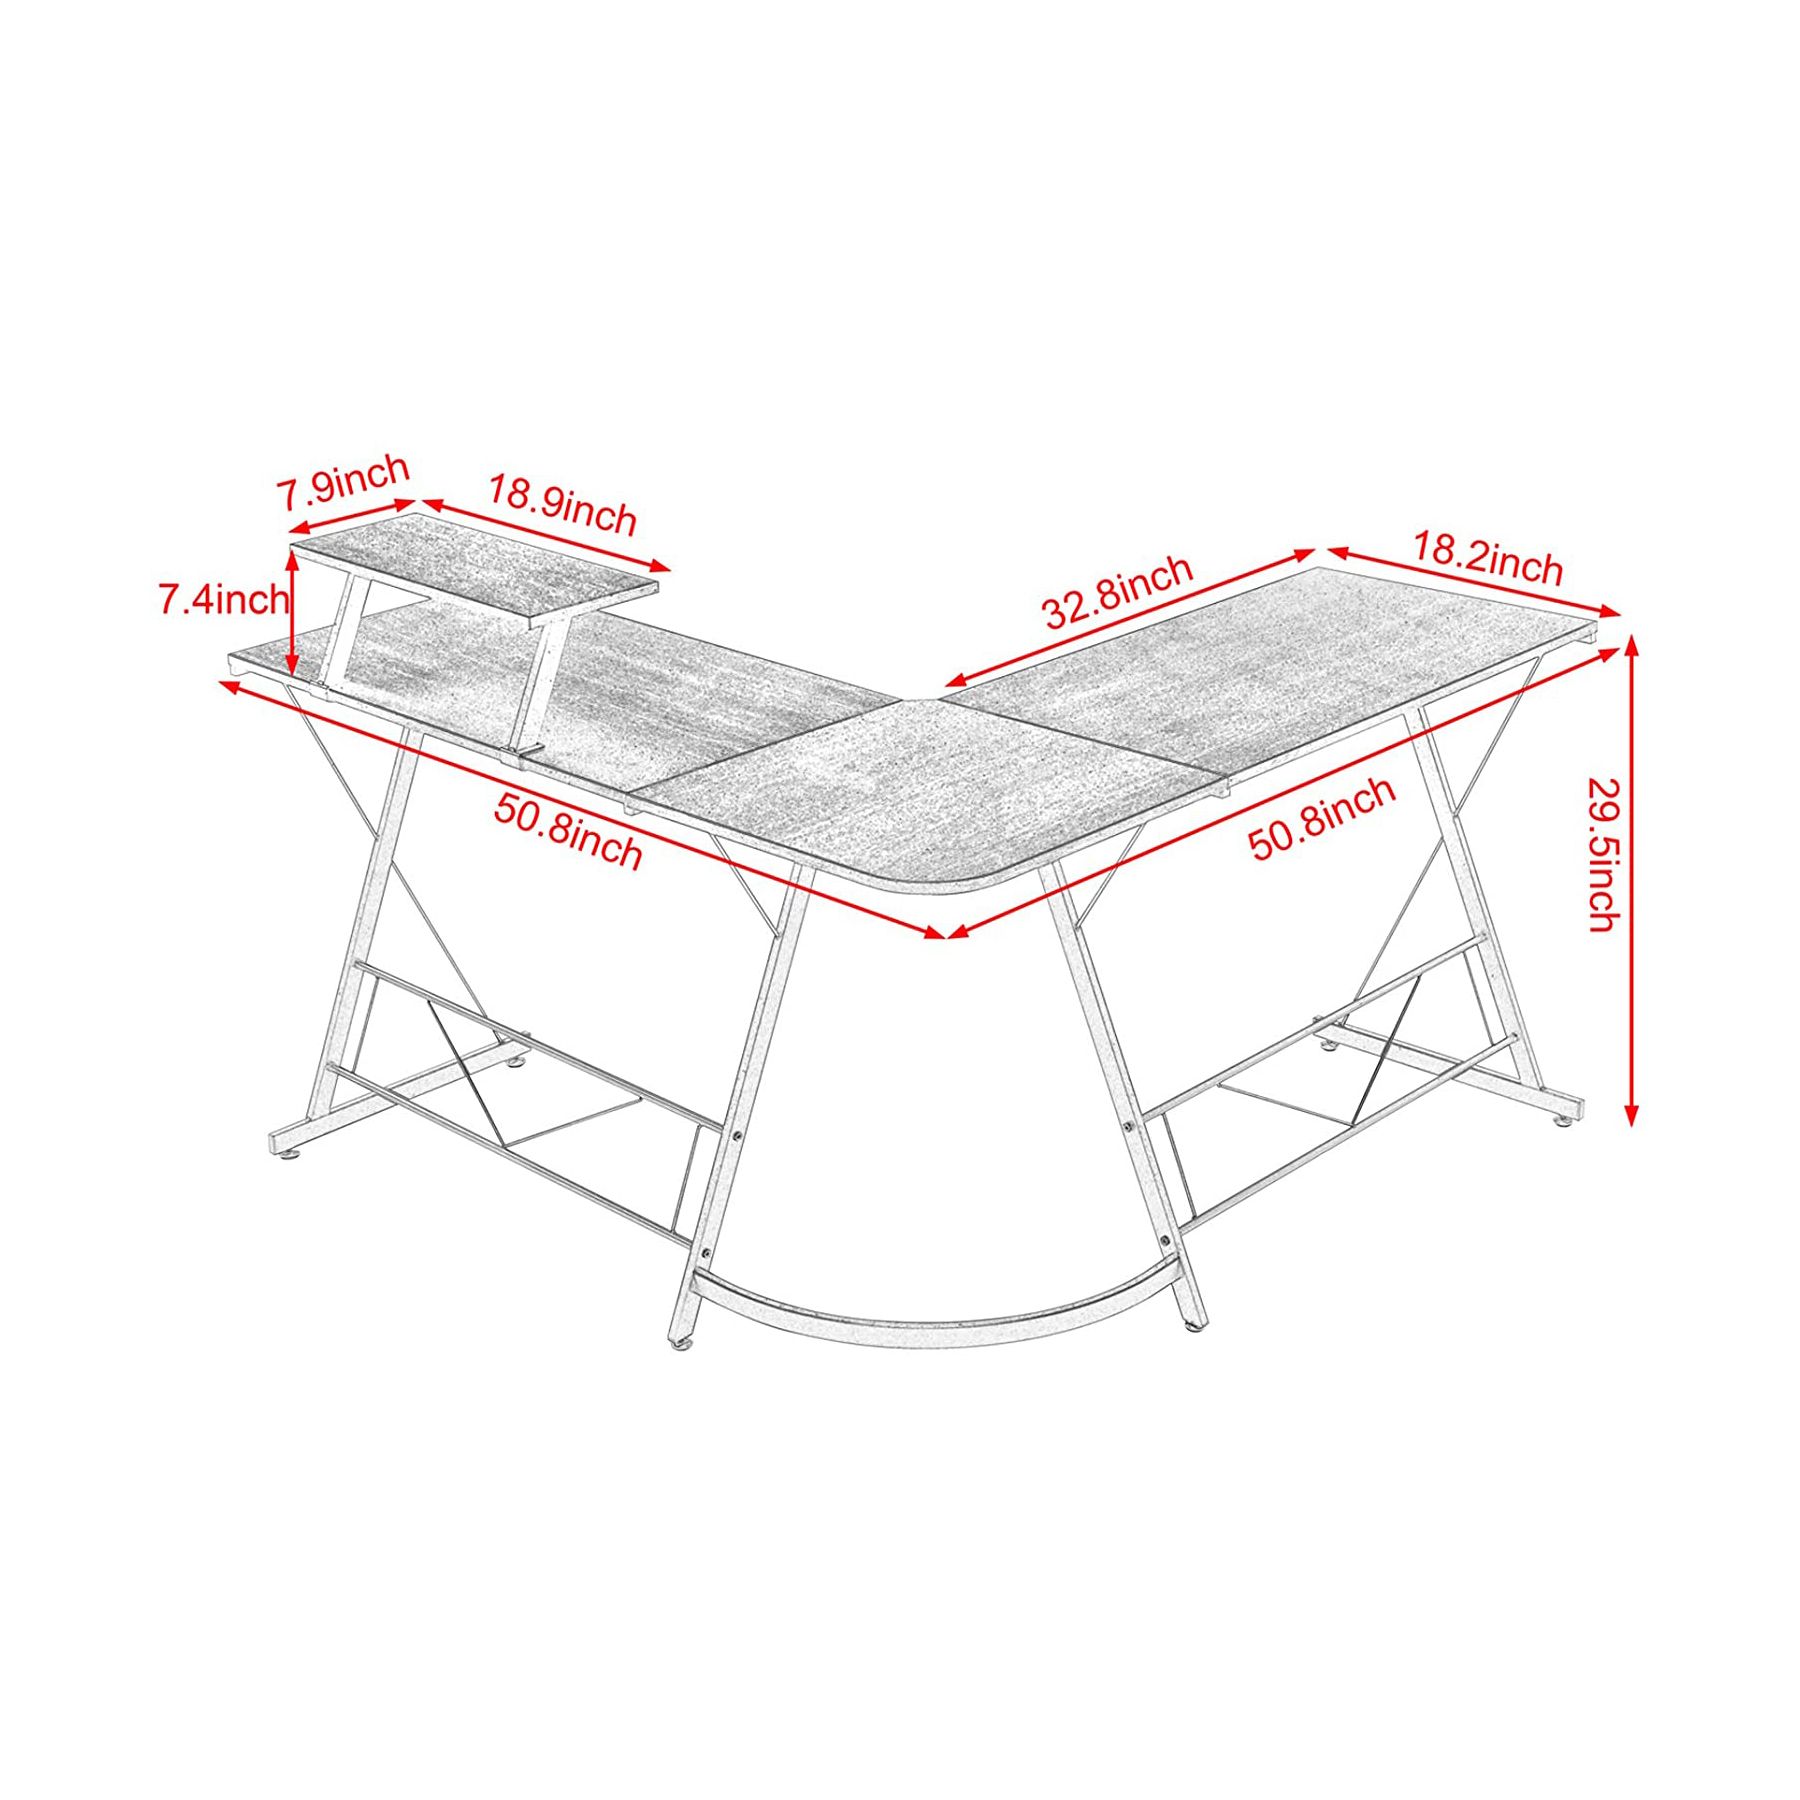 Mr IRONSTONE 50_8-inch L-Shaped Gaming Desk 03